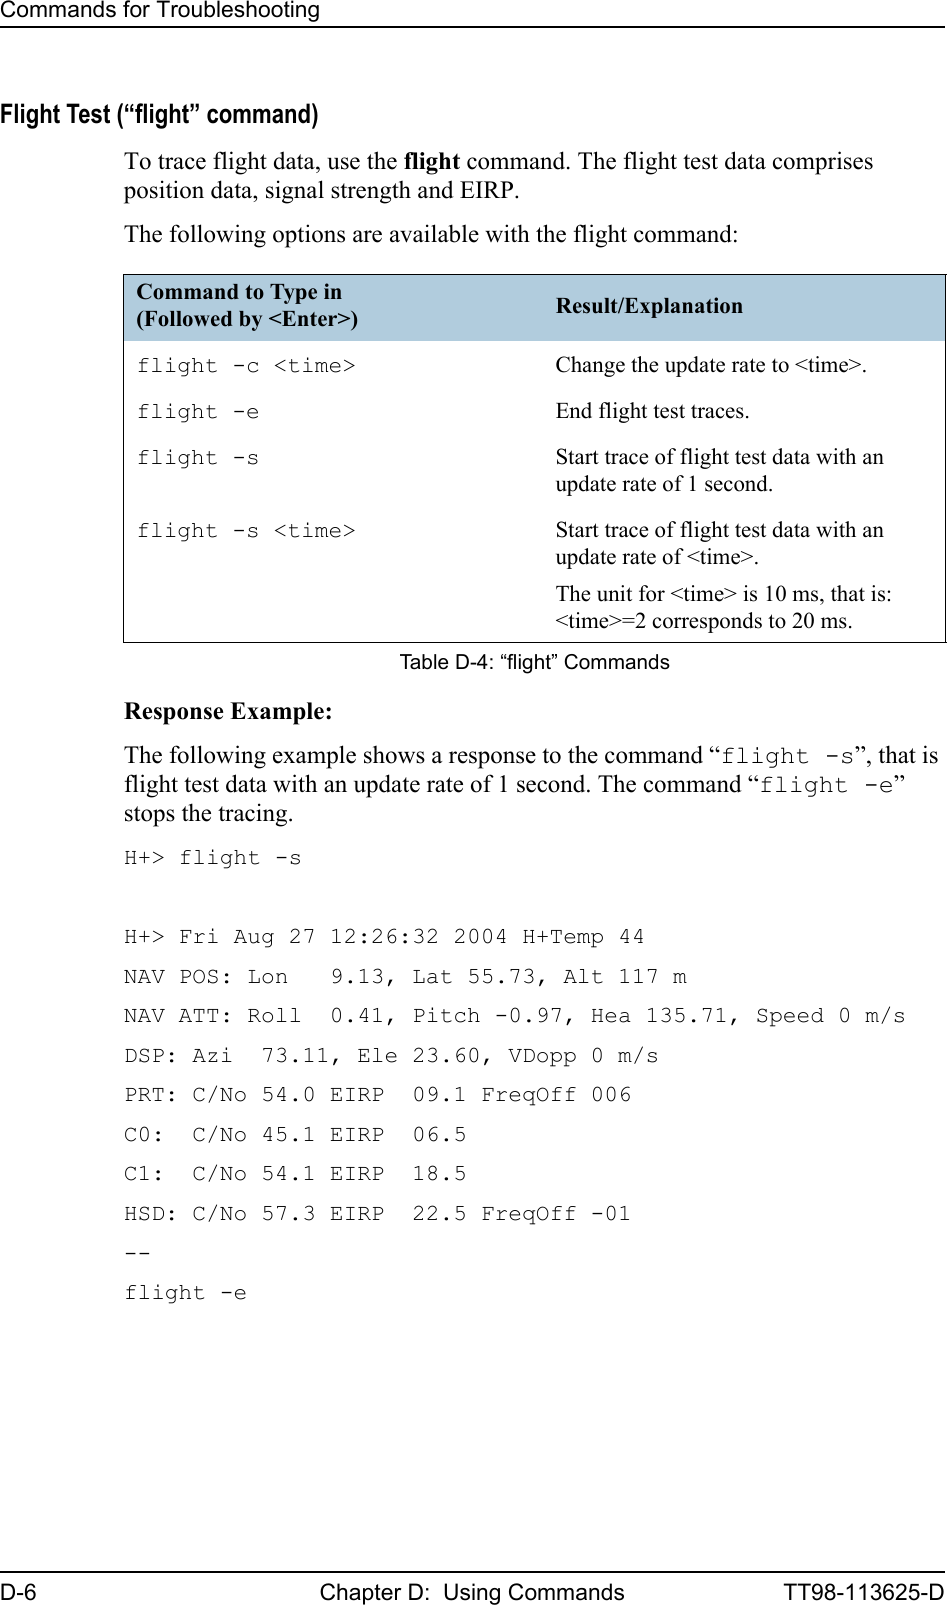 Commands for TroubleshootingD-6 Chapter D:  Using Commands TT98-113625-DFlight Test (“flight” command)To trace flight data, use the flight command. The flight test data comprises position data, signal strength and EIRP. The following options are available with the flight command:Response Example:The following example shows a response to the command “flight -s”, that is flight test data with an update rate of 1 second. The command “flight -e” stops the tracing.H+&gt; flight -sH+&gt; Fri Aug 27 12:26:32 2004 H+Temp 44NAV POS: Lon   9.13, Lat 55.73, Alt 117 mNAV ATT: Roll  0.41, Pitch -0.97, Hea 135.71, Speed 0 m/sDSP: Azi  73.11, Ele 23.60, VDopp 0 m/sPRT: C/No 54.0 EIRP  09.1 FreqOff 006C0:  C/No 45.1 EIRP  06.5C1:  C/No 54.1 EIRP  18.5HSD: C/No 57.3 EIRP  22.5 FreqOff -01--flight -eCommand to Type in(Followed by &lt;Enter&gt;) Result/Explanationflight -c &lt;time&gt; Change the update rate to &lt;time&gt;.flight -e End flight test traces.flight -s Start trace of flight test data with an update rate of 1 second.flight -s &lt;time&gt; Start trace of flight test data with an update rate of &lt;time&gt;.The unit for &lt;time&gt; is 10 ms, that is: &lt;time&gt;=2 corresponds to 20 ms.Table D-4: “flight” Commands